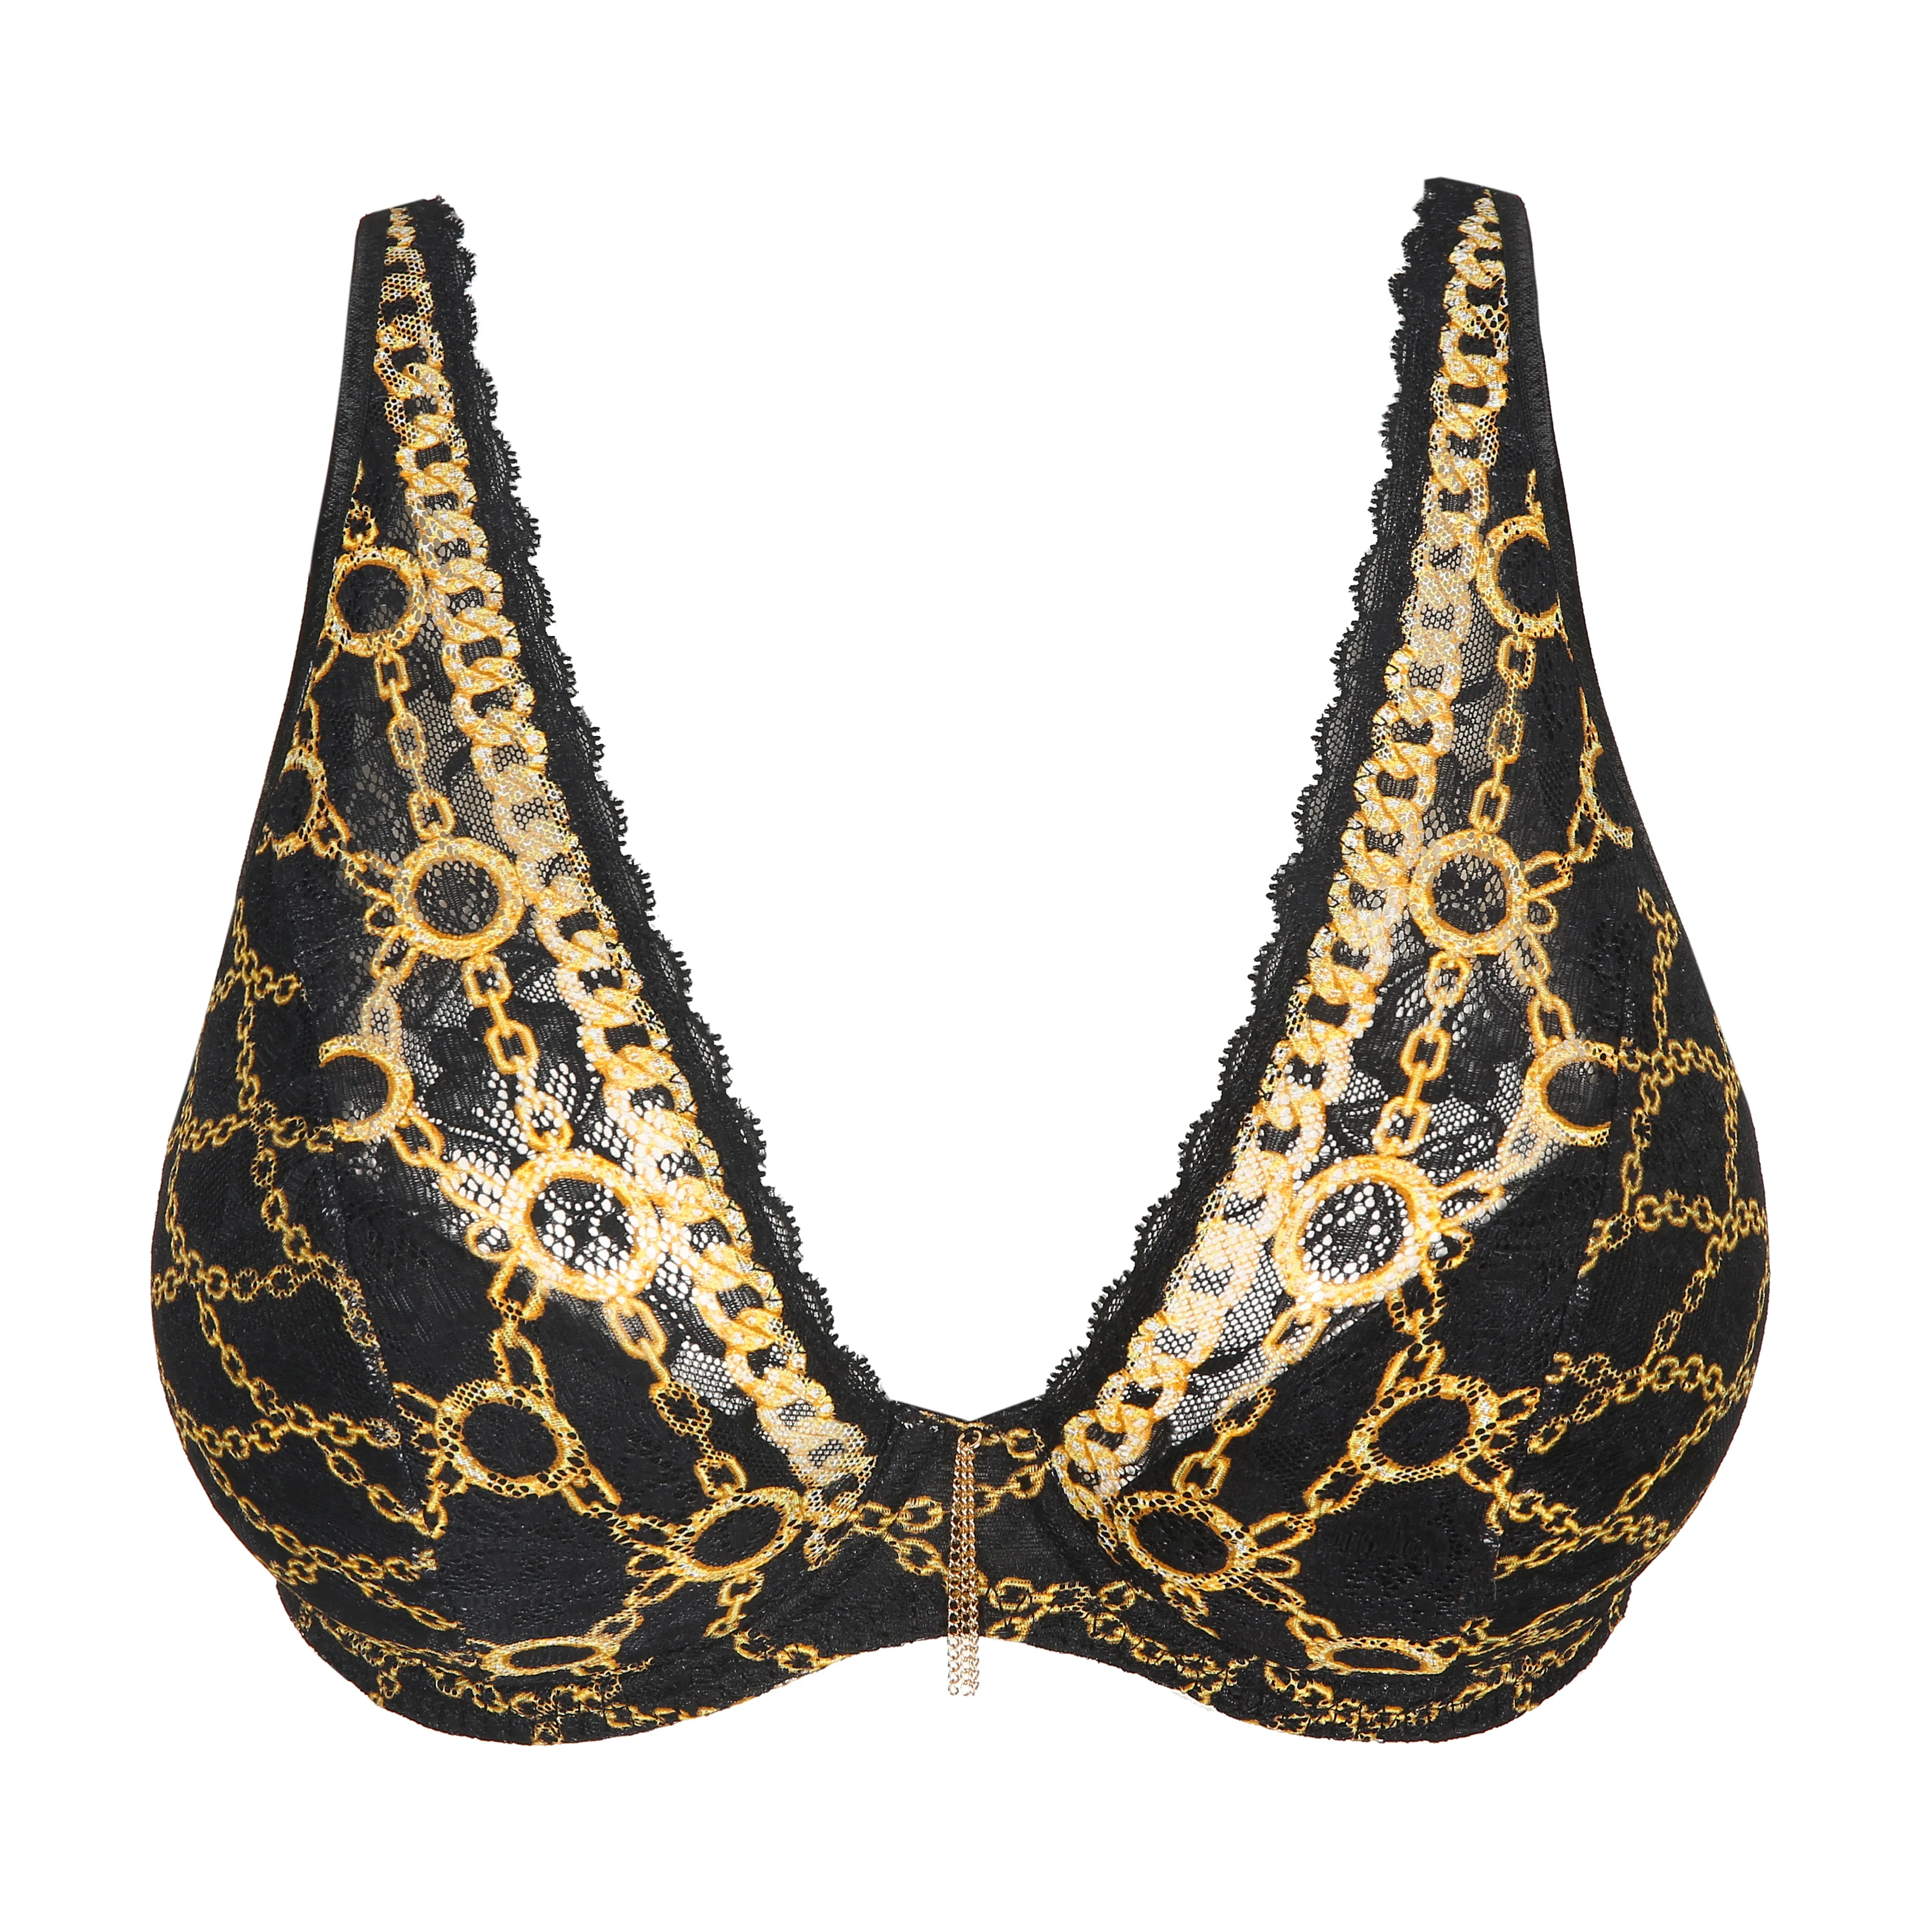 minimizer bralette, underwired, padded, cafe plume, primadonna twist.  limited edition.